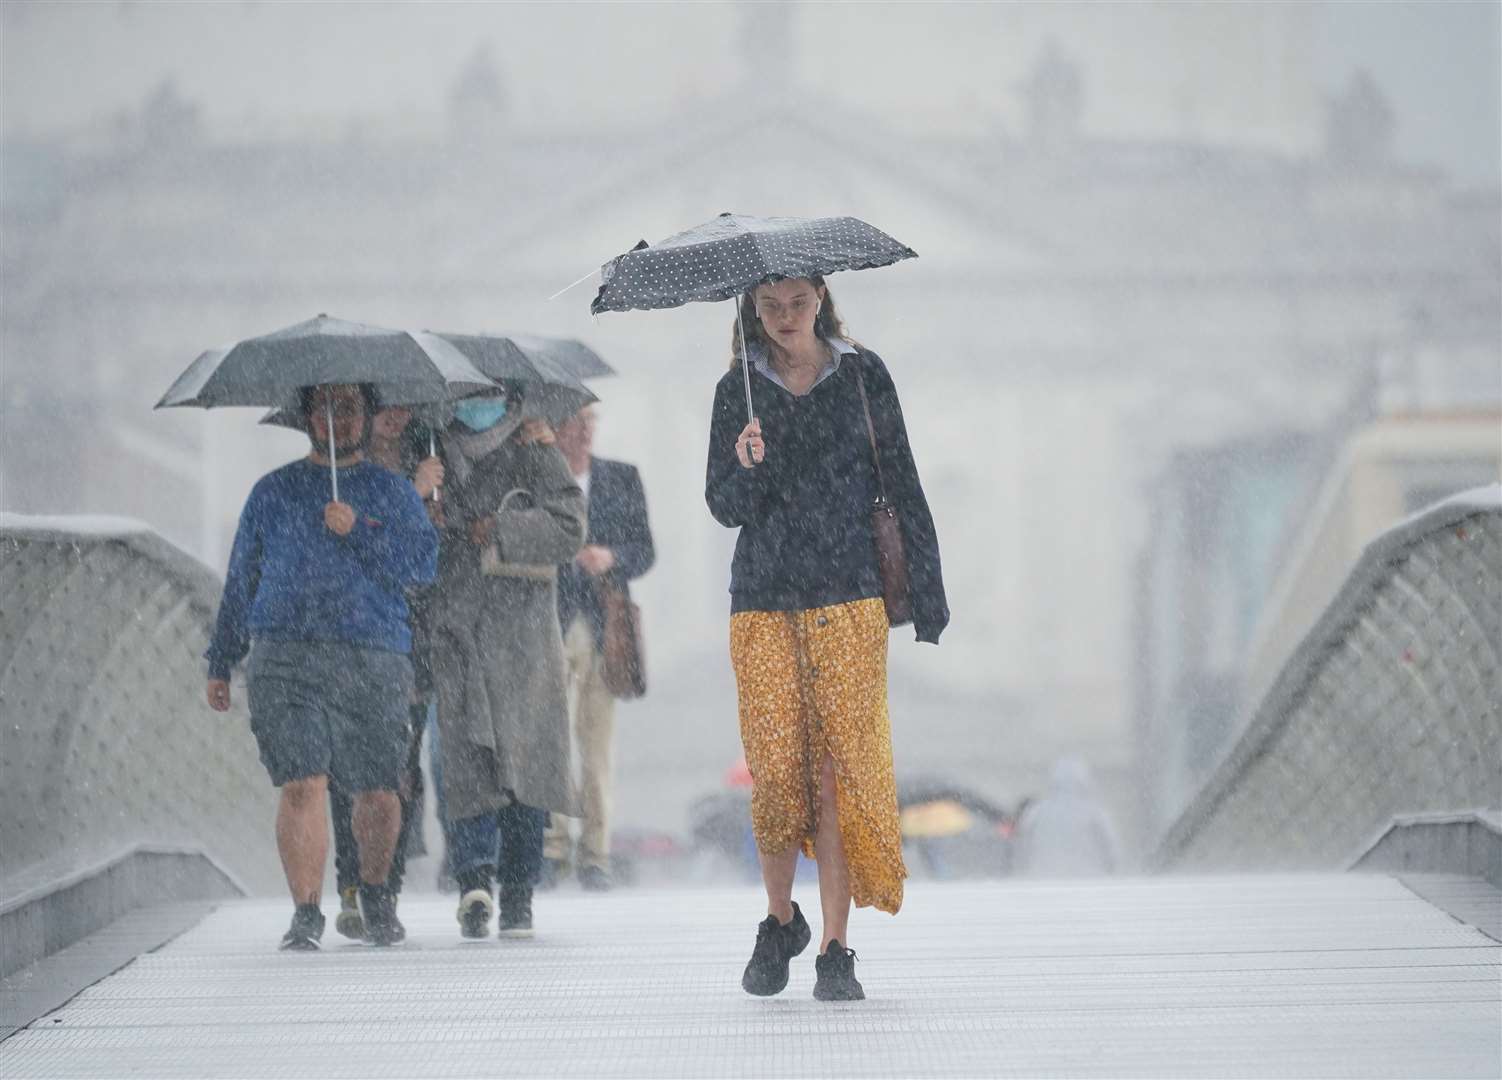 This year had one of the wettest Julys on record (Yui Mok/PA)